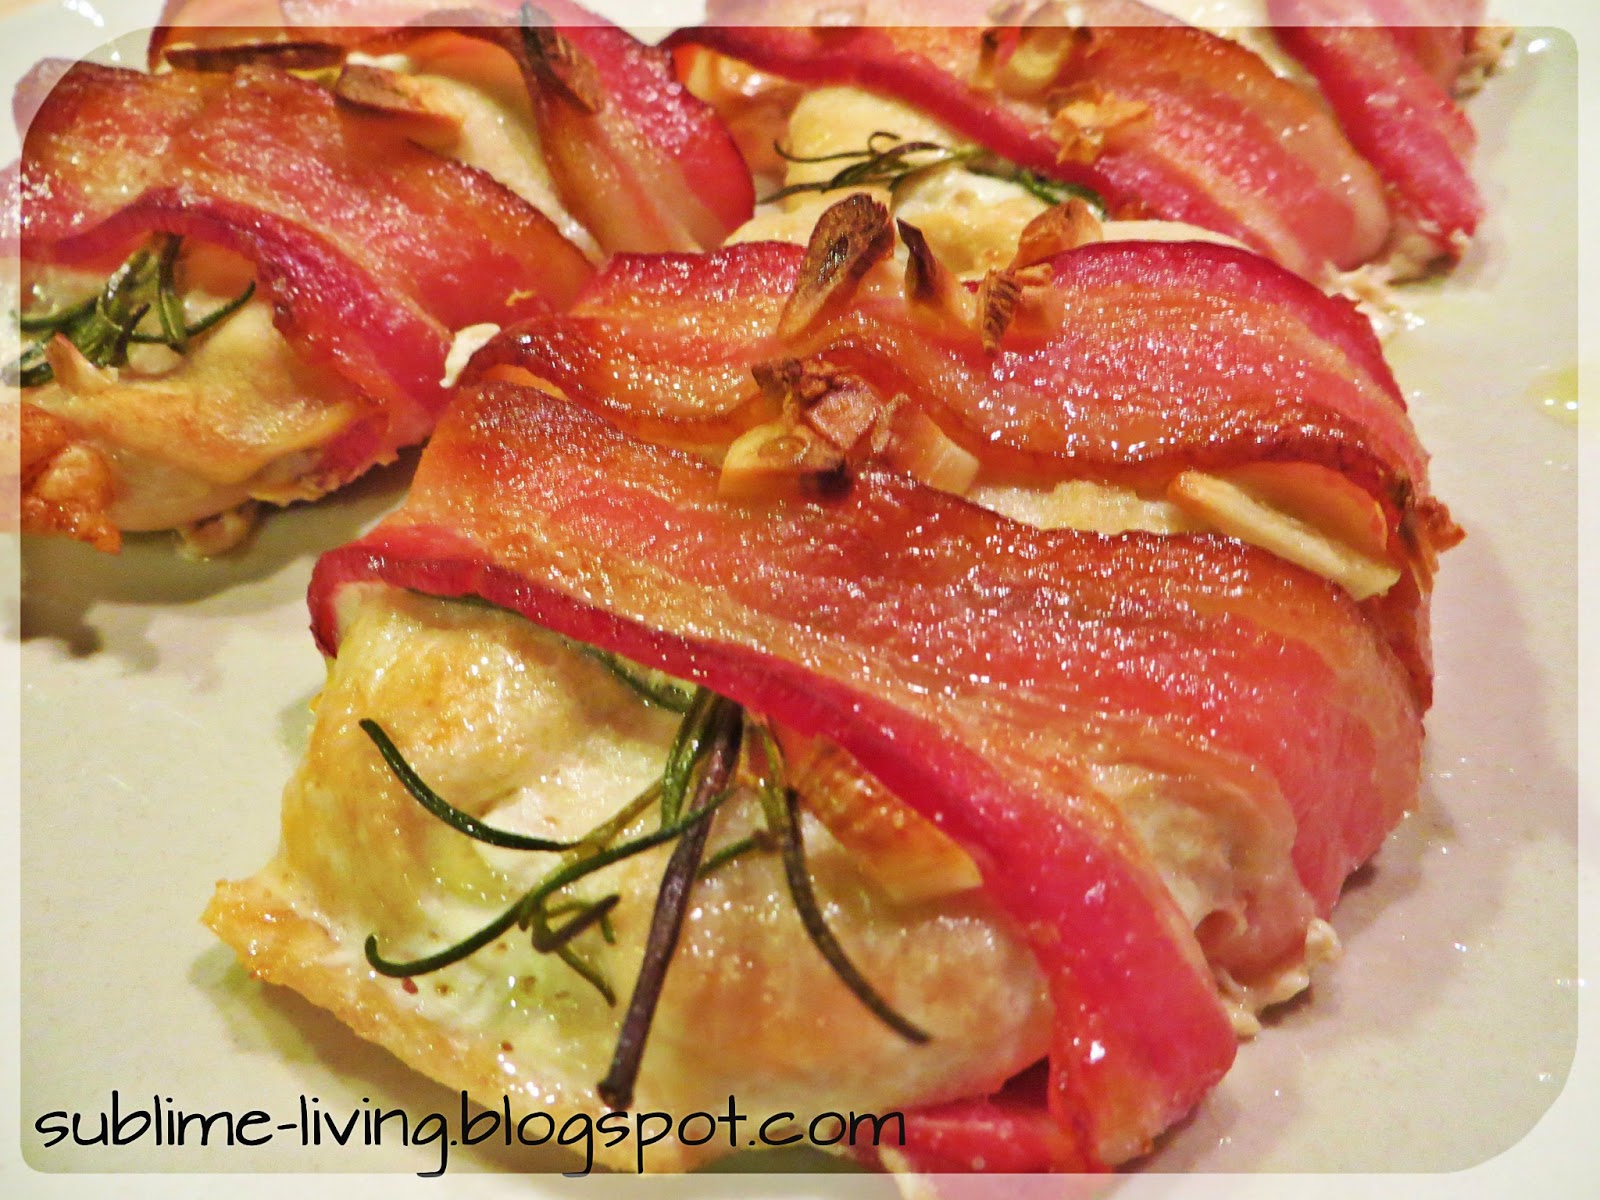 SUBLIMEliving: Paleo Bacon Wrapped Rosemary Garlic Chicken Recipe